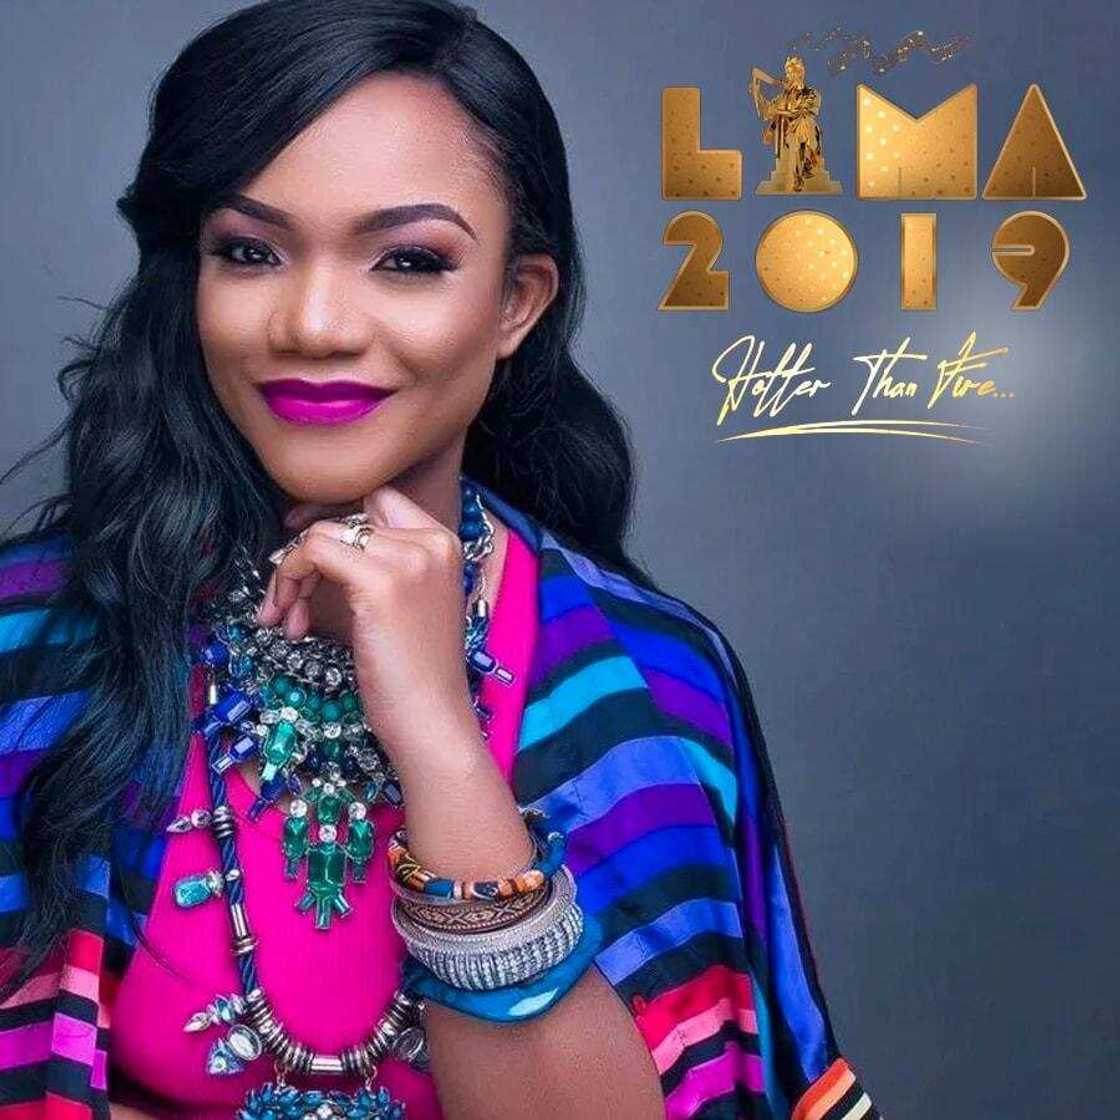 2019 LIMA Awards with Pastor Chris Oyakhilome will be Hotter Than Fire